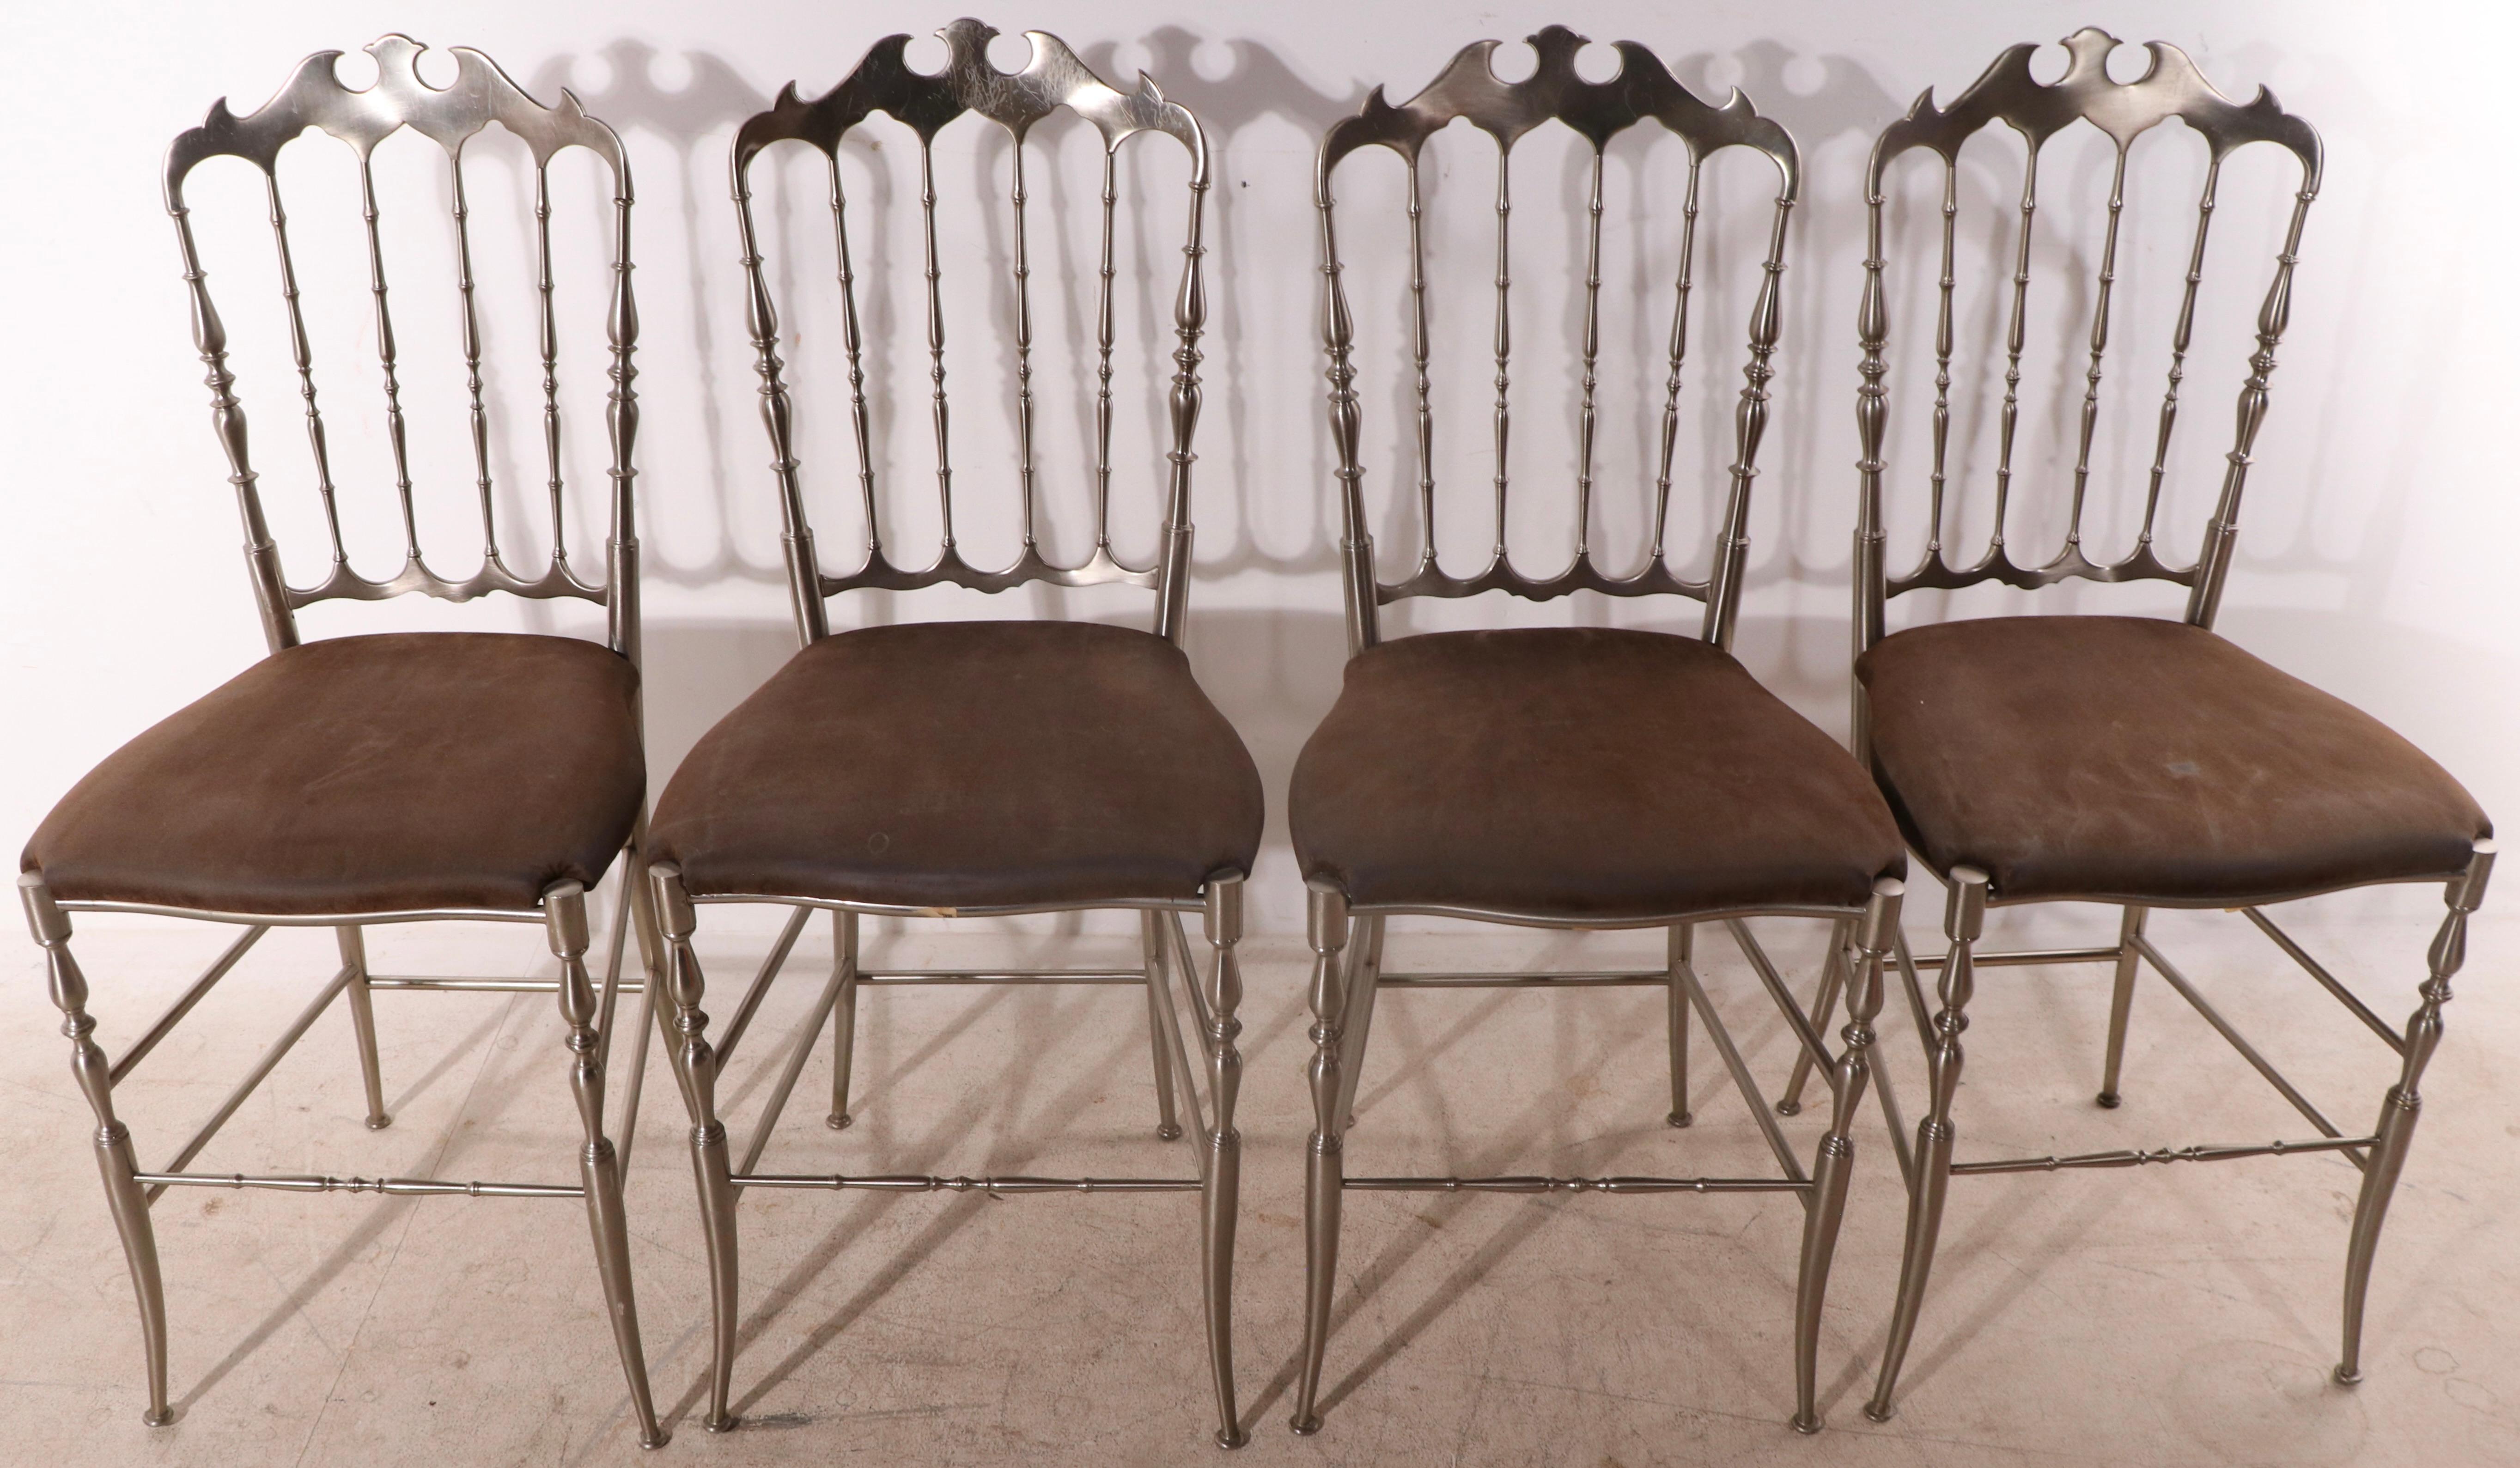 Hollywood Regency Set of Charivari Chairs in Steel Finish from Made in Italy retailed by WJ Sloane For Sale